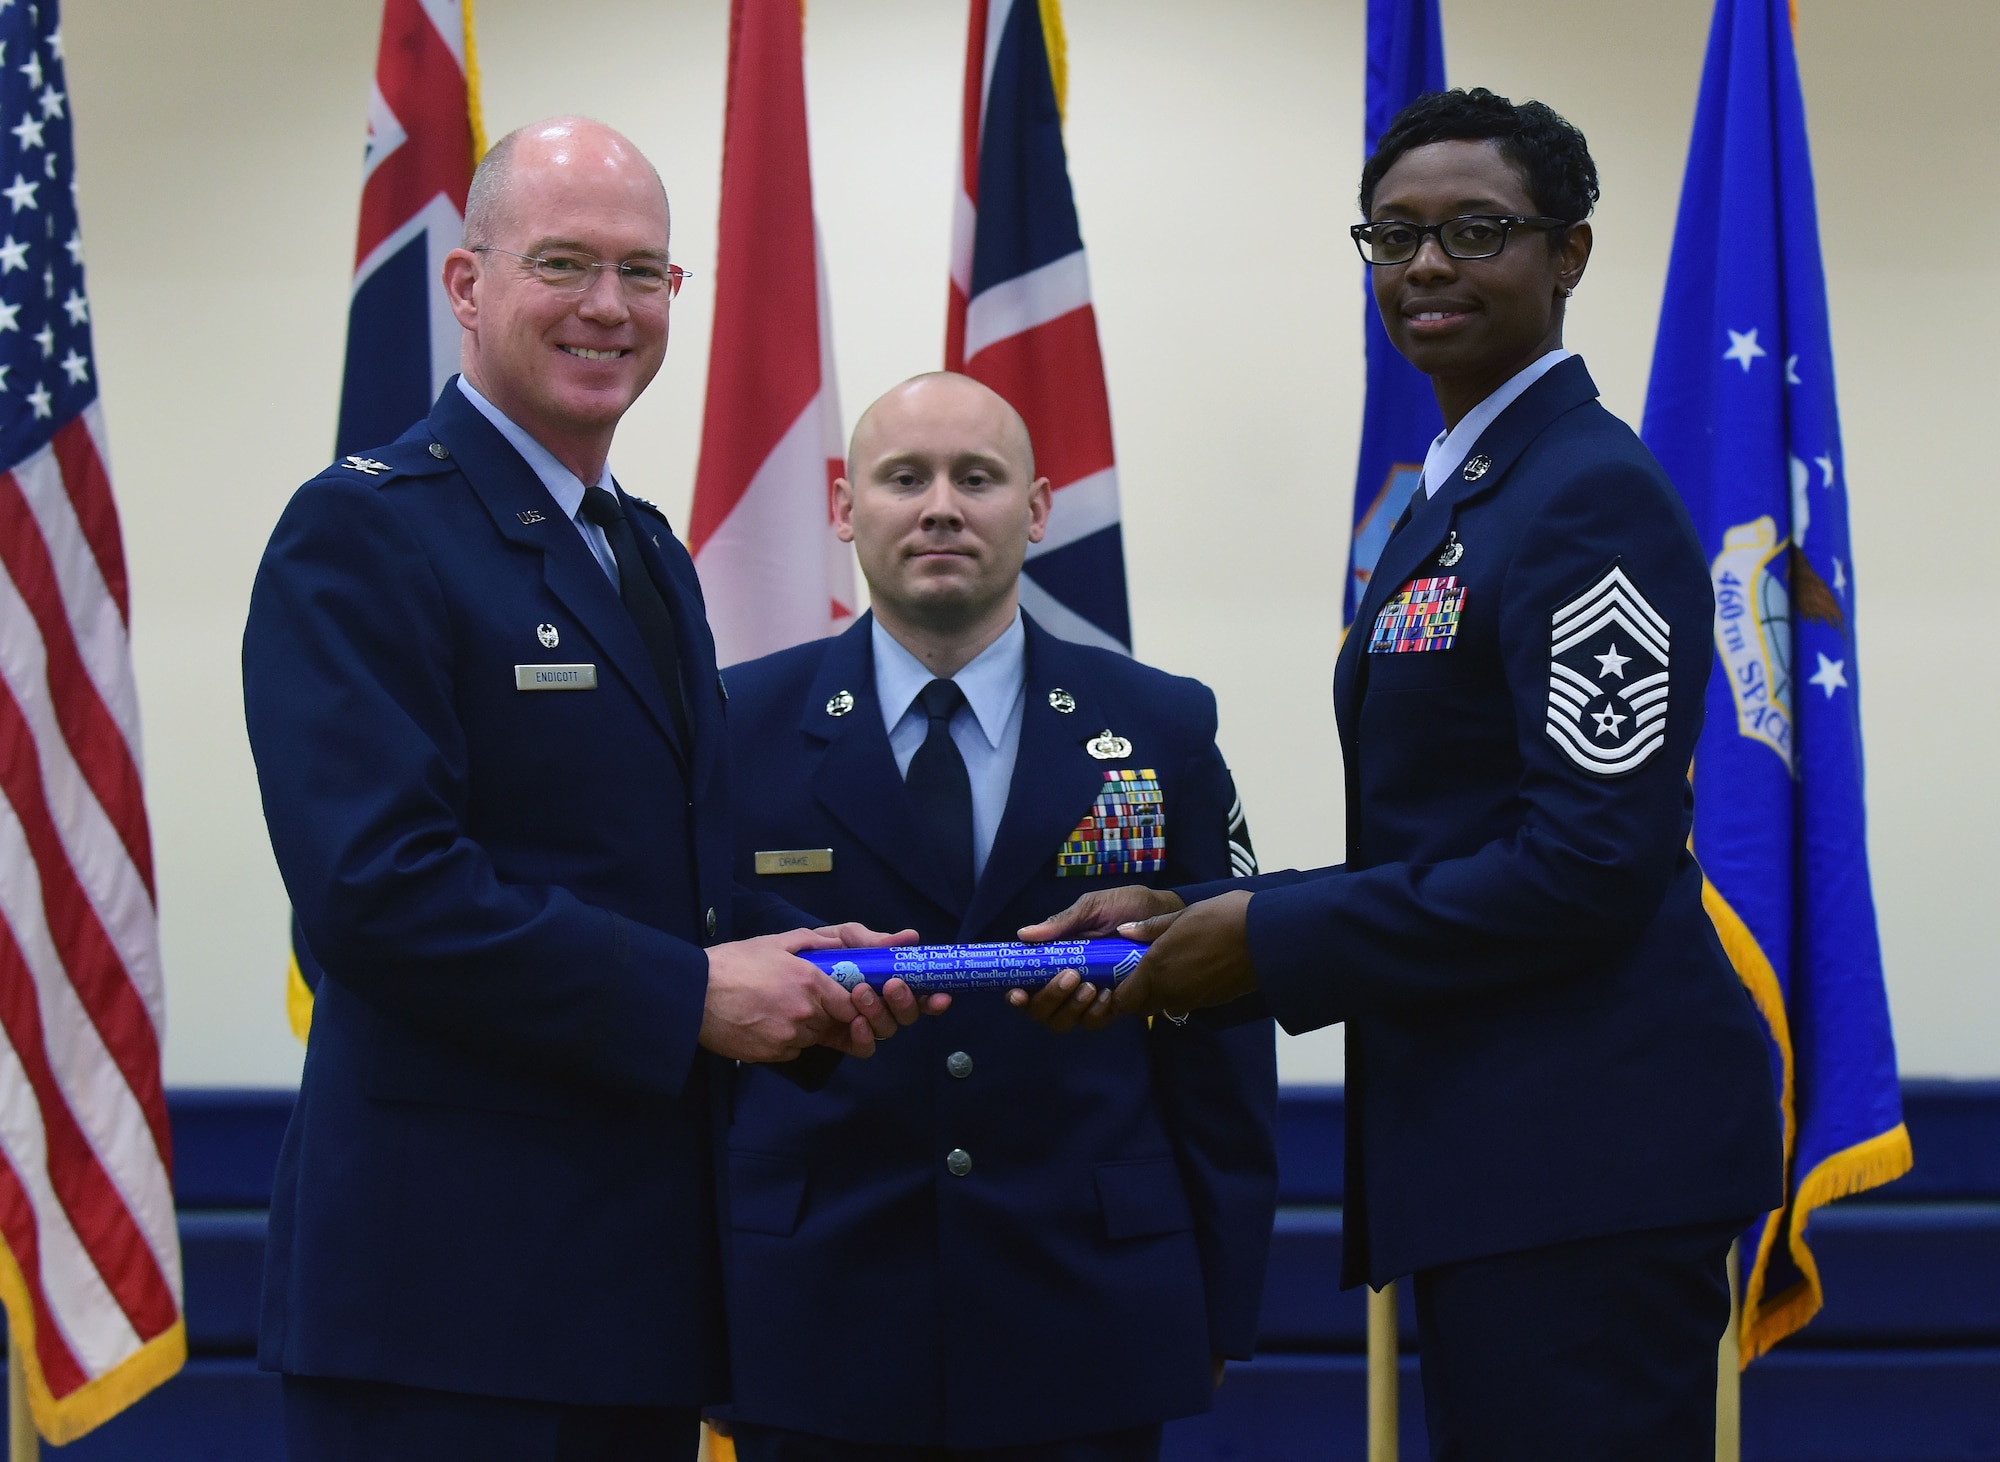 Chief Master Sgt. Tamar Dennis, 460th Space Wing command chief, accepts the baton from Col. Troy L. Endicott, 460th SW commander, symbolizing the change of leadership on Buckley Air Force Base, Colorado, July 20, 2018.